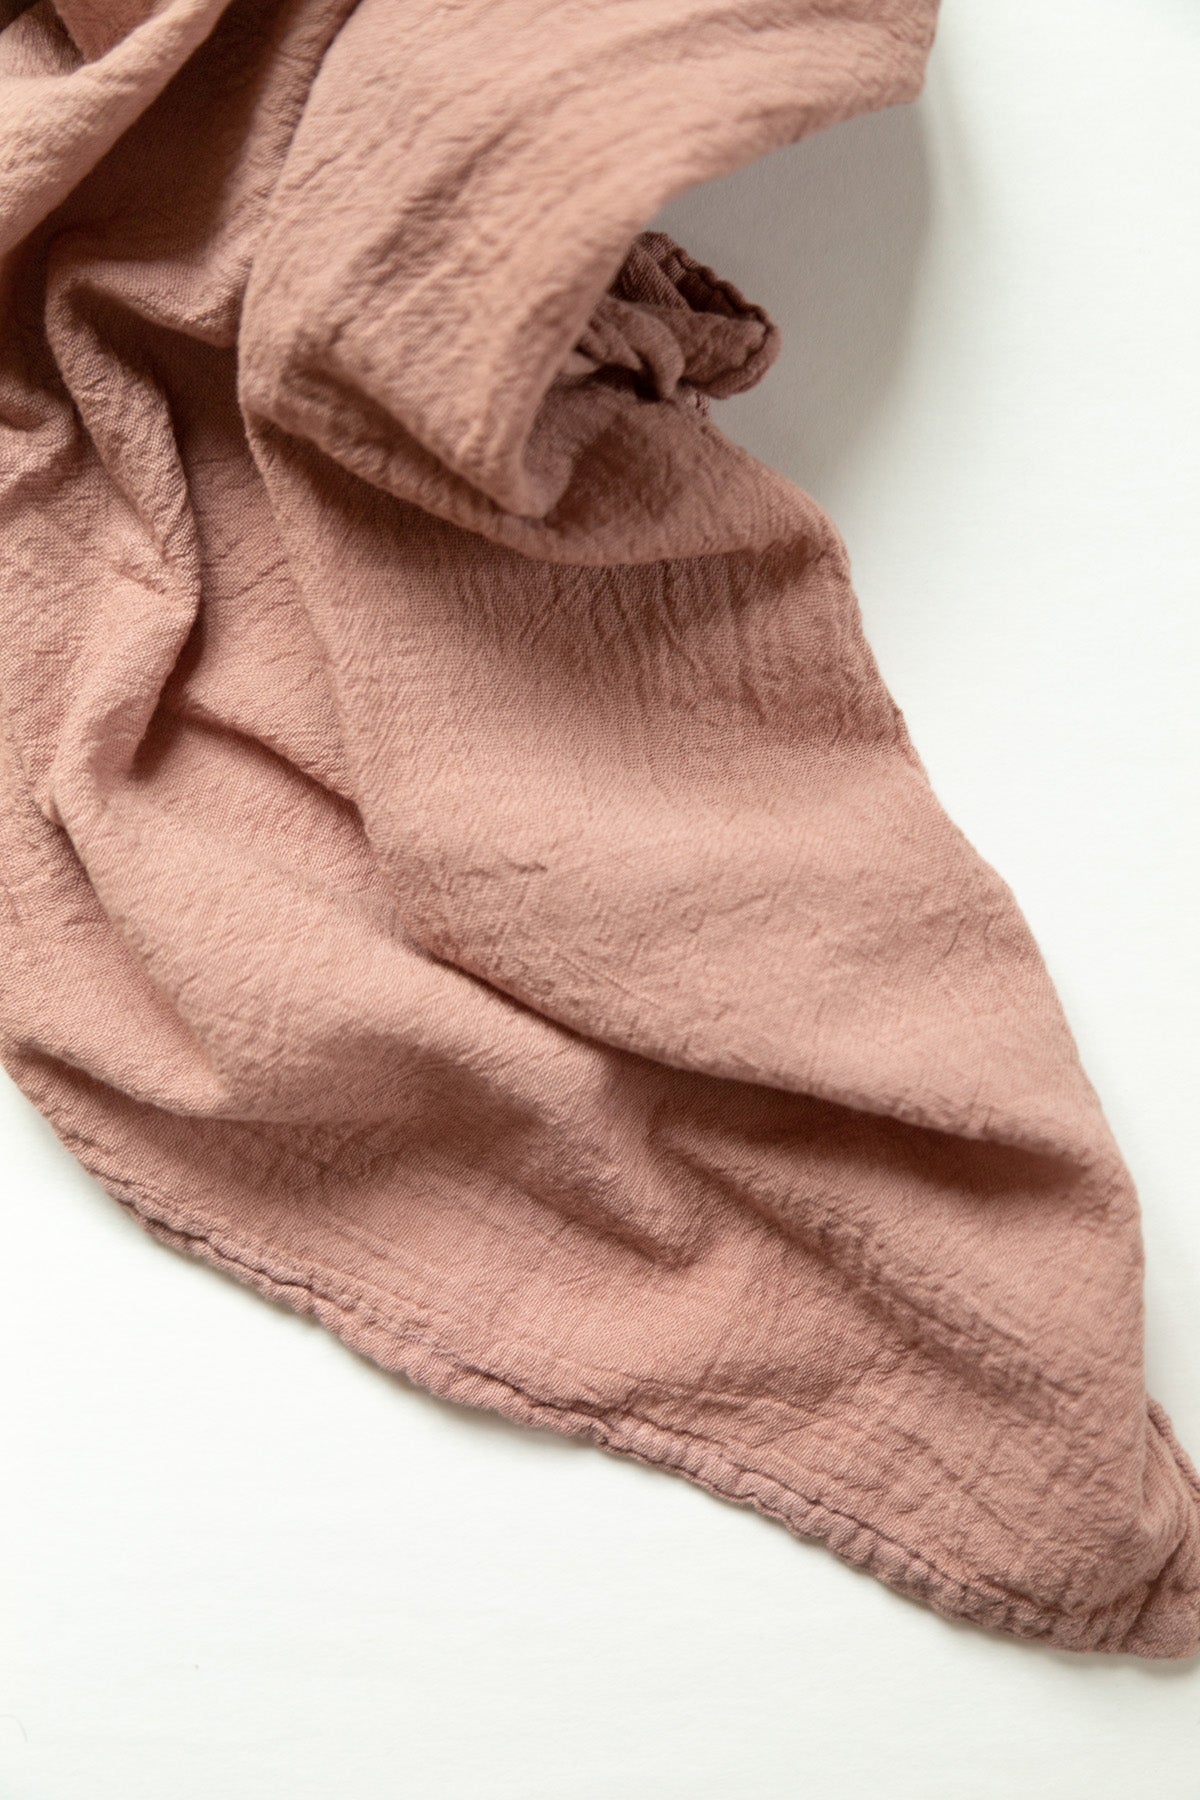 Hand-Dyed Dish Towels – Blush Trio (Set of 3)